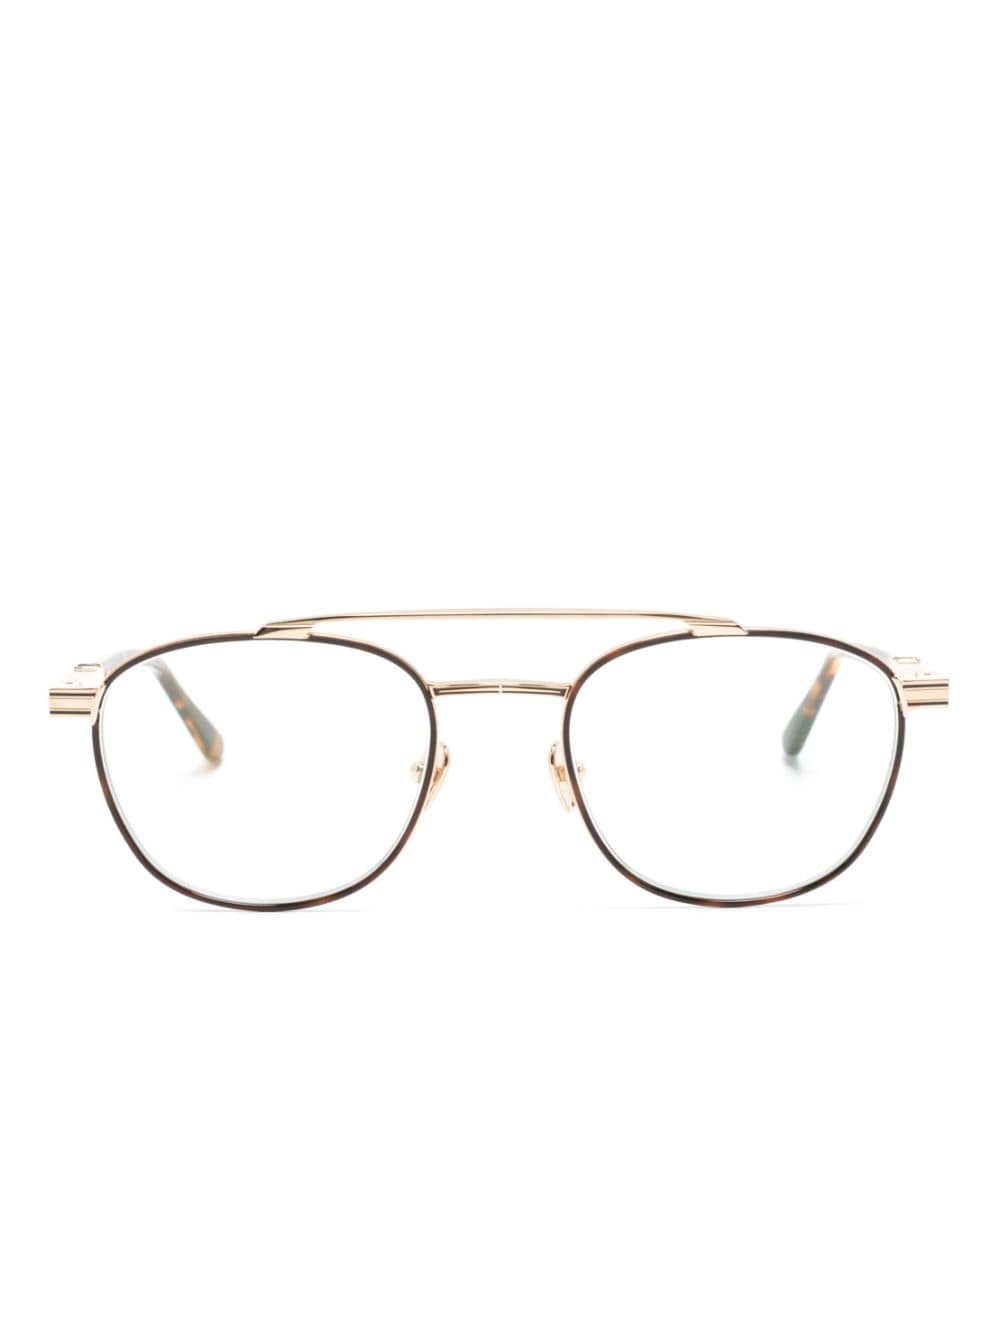 Leisure Society Melvyn Pilot -frame Glasses In Gold